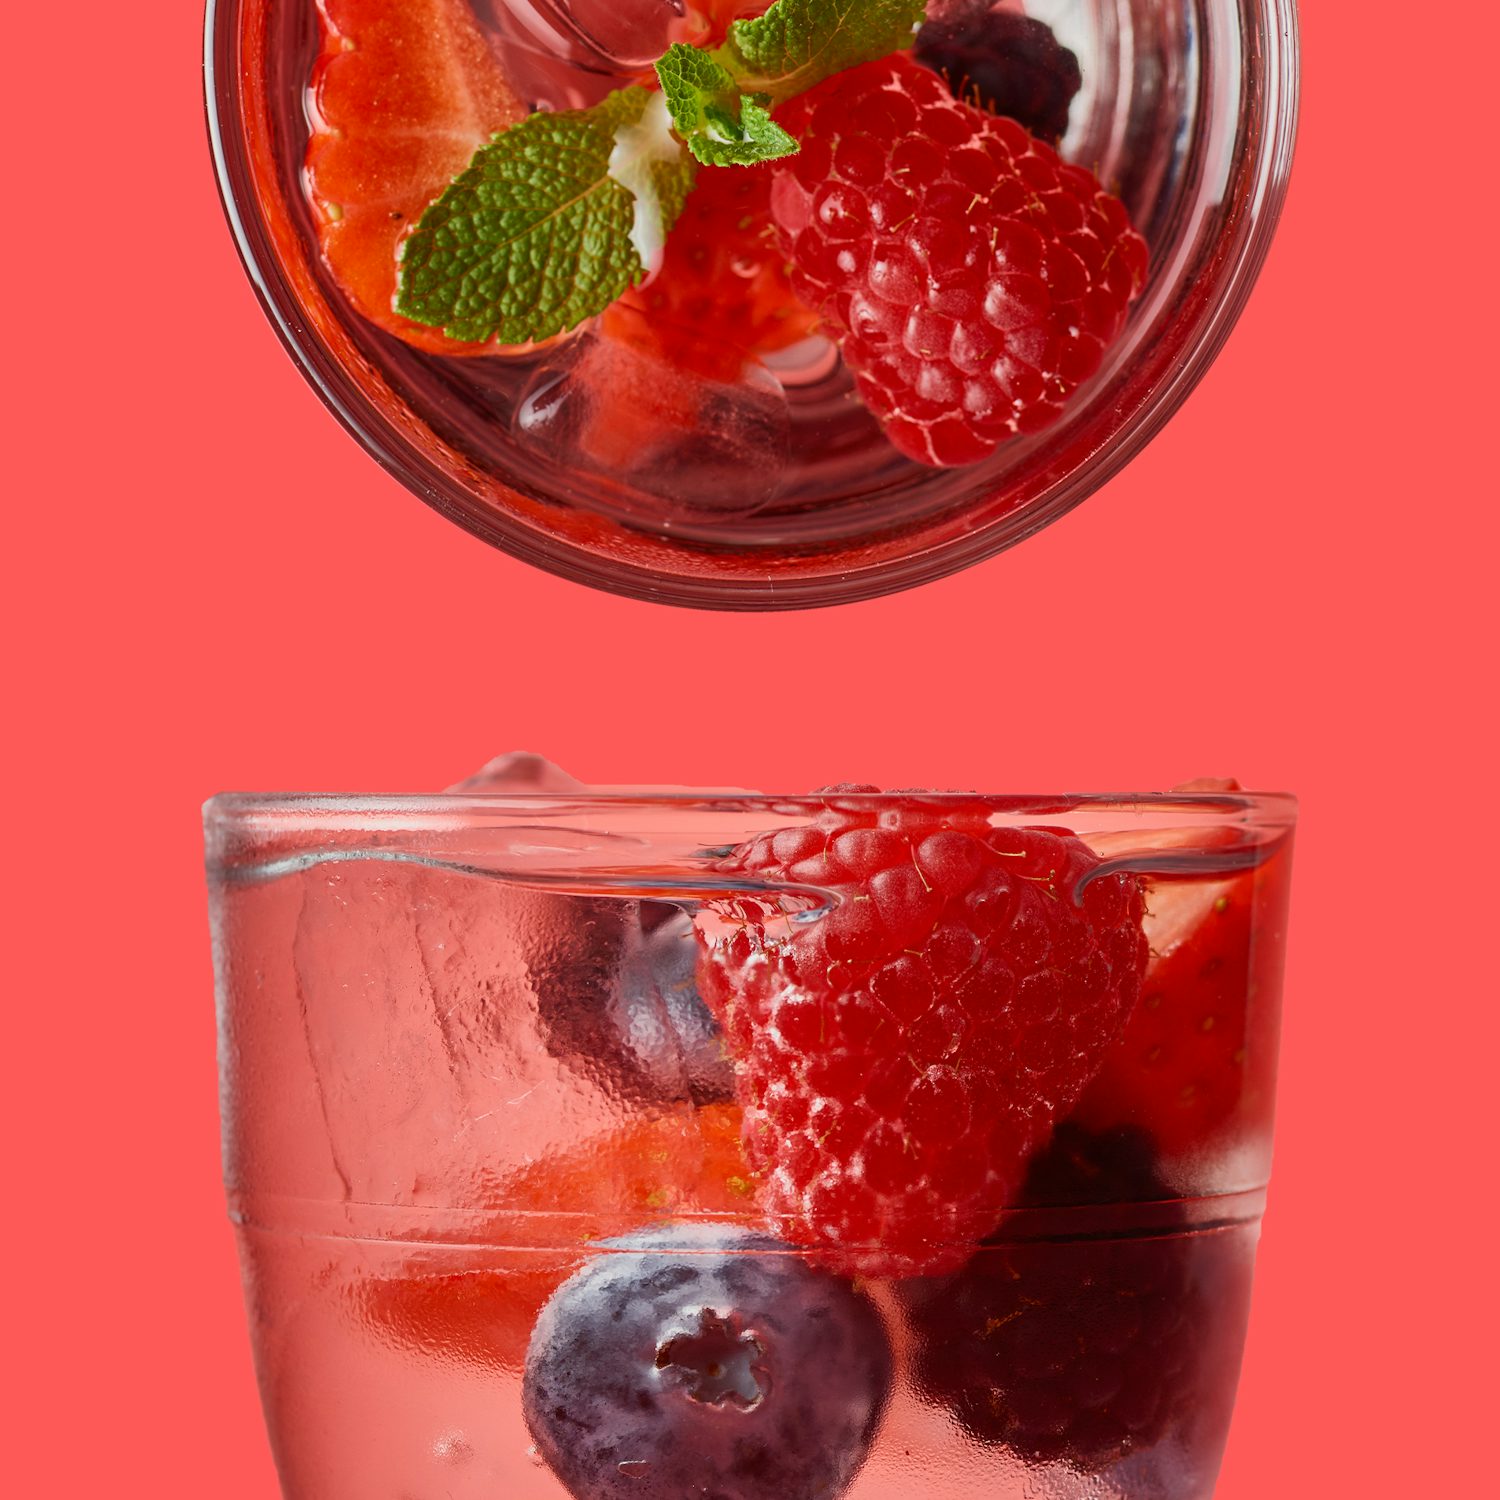 https://berryworld.imgix.net/assets/Mixed-berry-infused-water-SQ.jpg?auto=format&crop=focalpoint&fit=crop&fp-x=0.5&fp-y=0.5&h=1500&ixlib=php-3.1.0&q=60&v=1557418316&w=2300